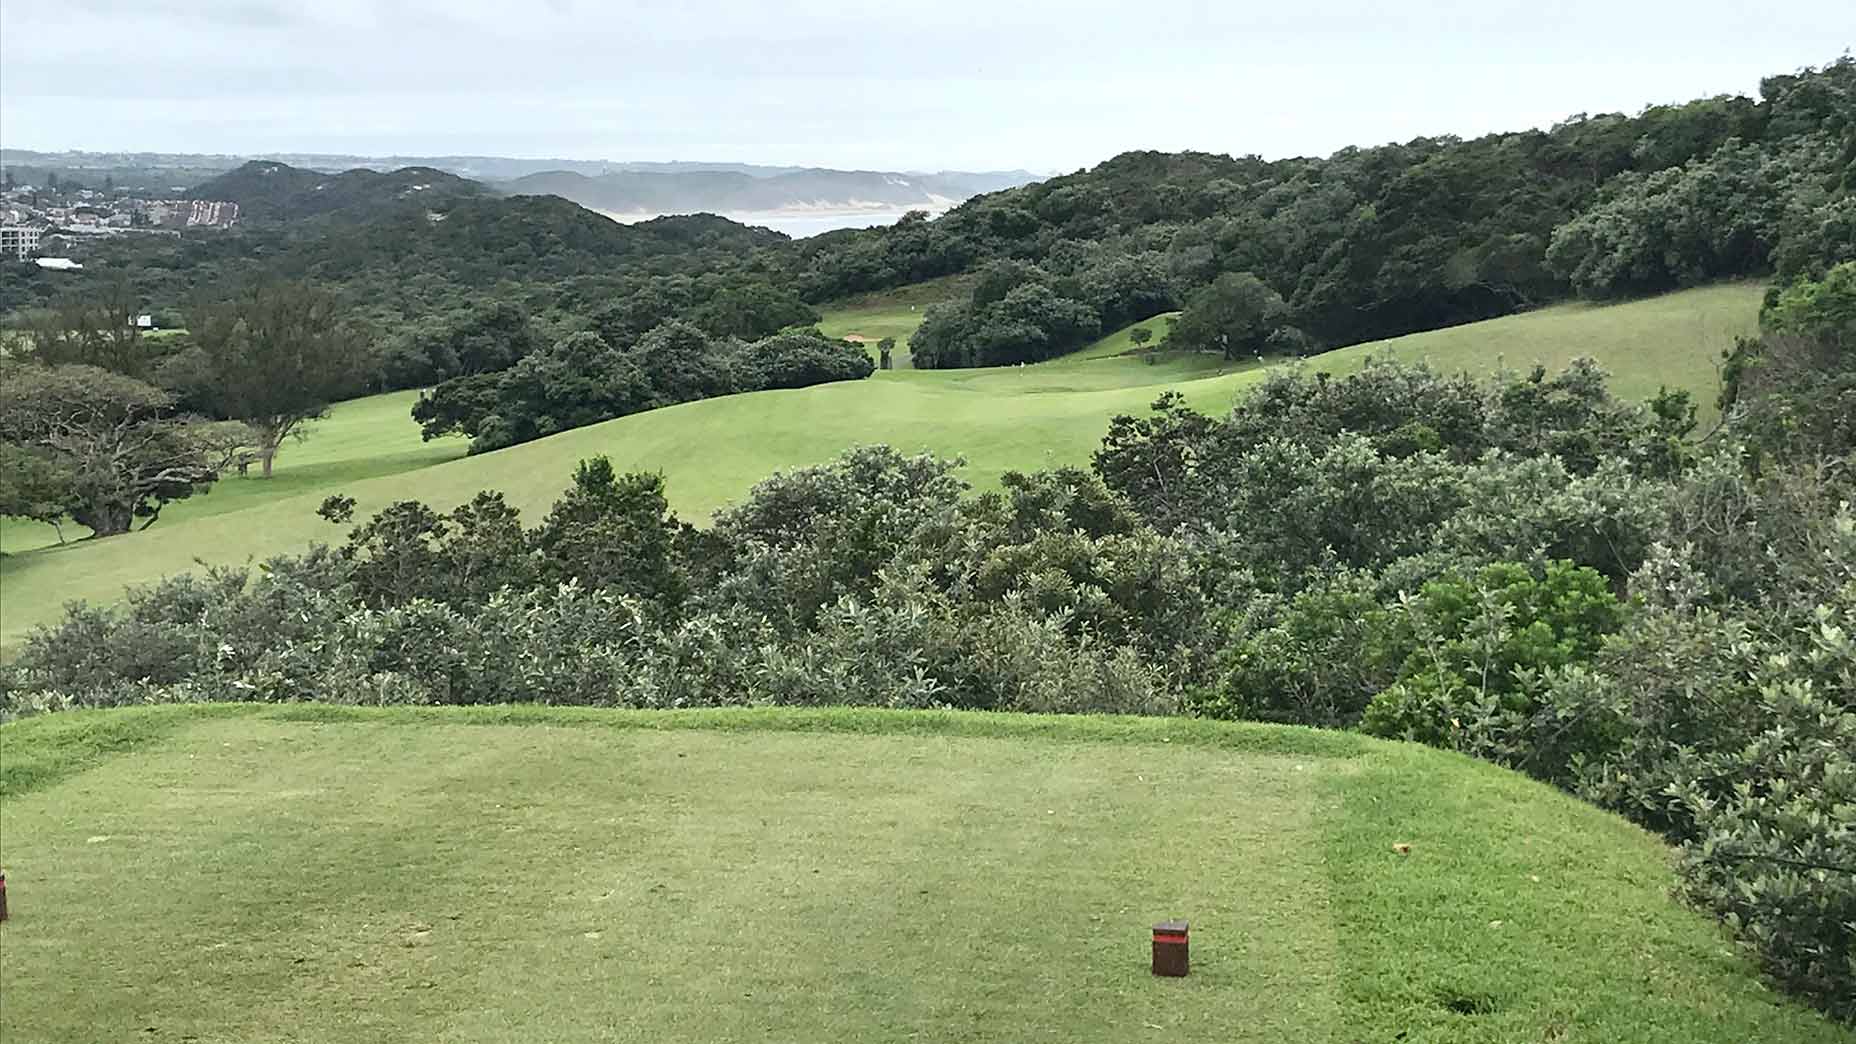 A view of East London Golf Club in South Africa.